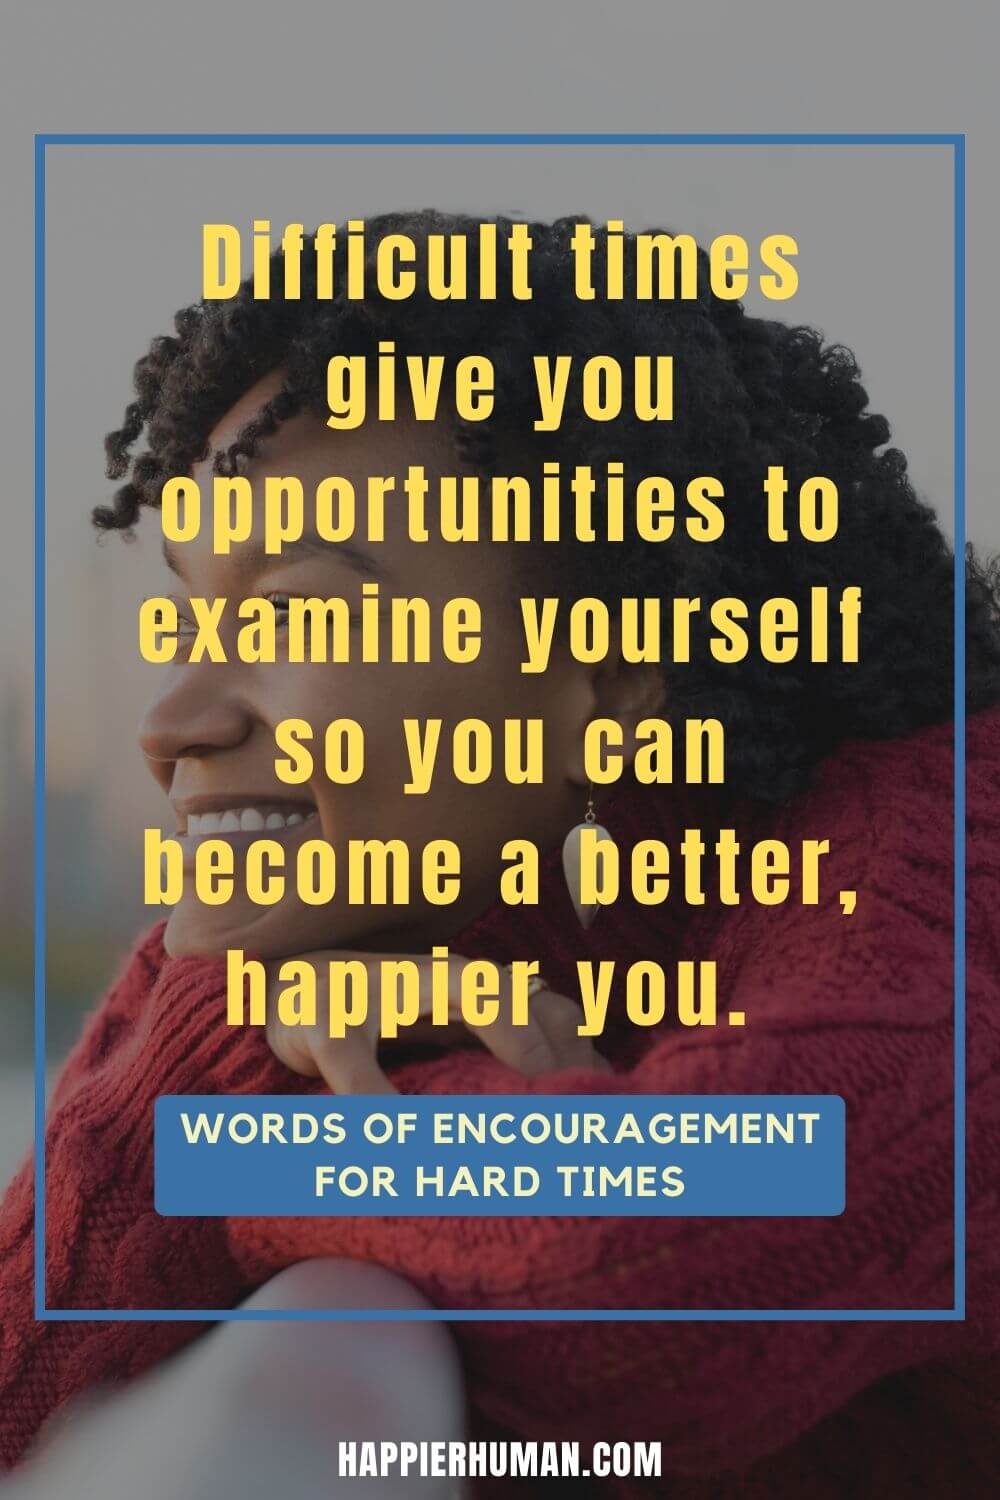 Words of Encouragement for Hard Times - Difficult times give you opportunities to examine yourself so you can become a better, happier you.  | spiritual inspirational quotes for difficult times | words of encouragement for her during hard times | letters of encouragement during tough times